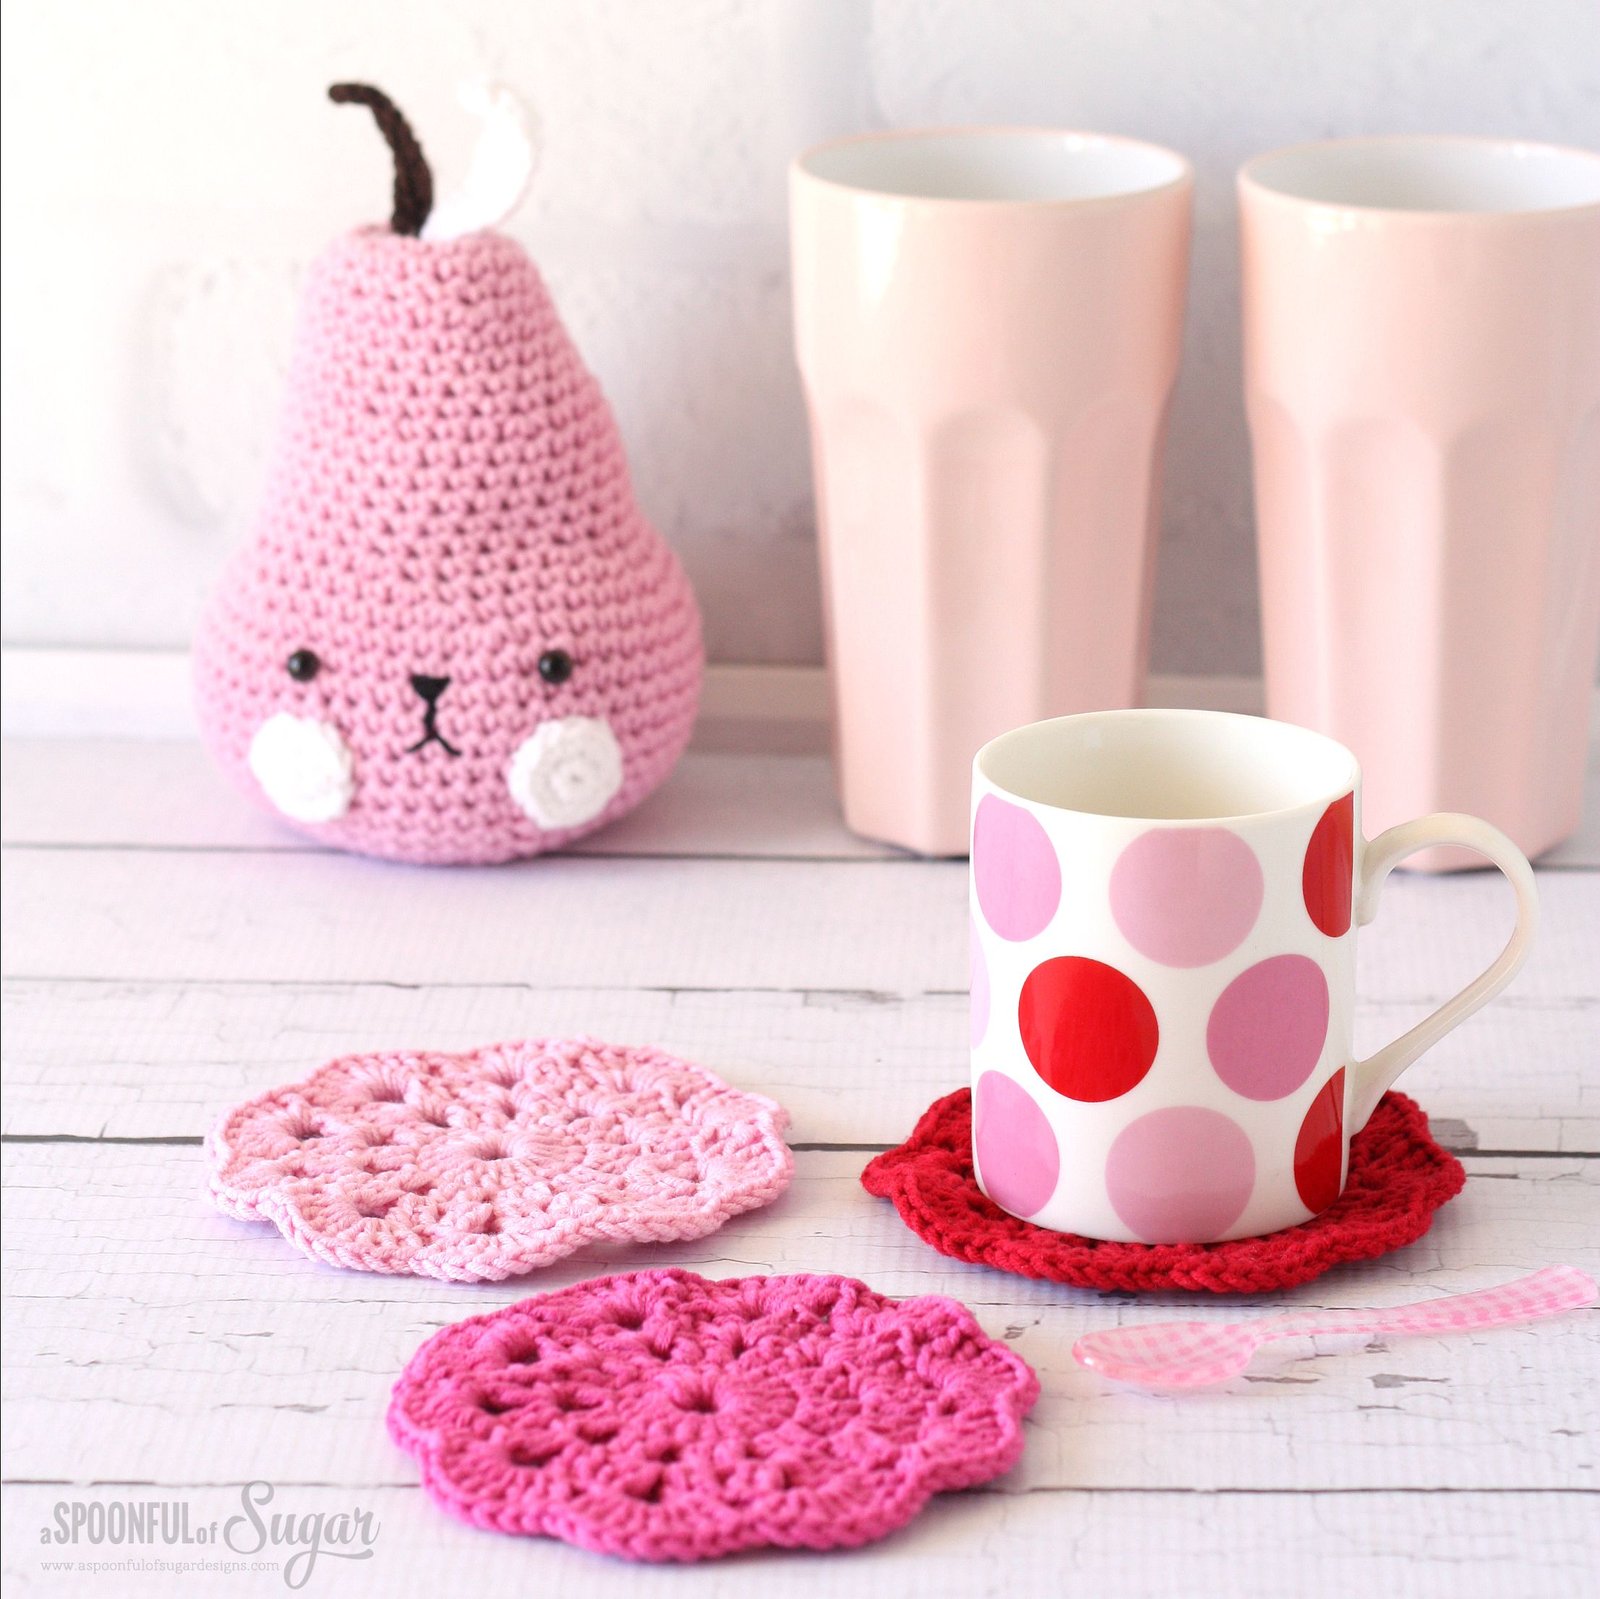 Crochet coasters by A Spoonful of Sugar